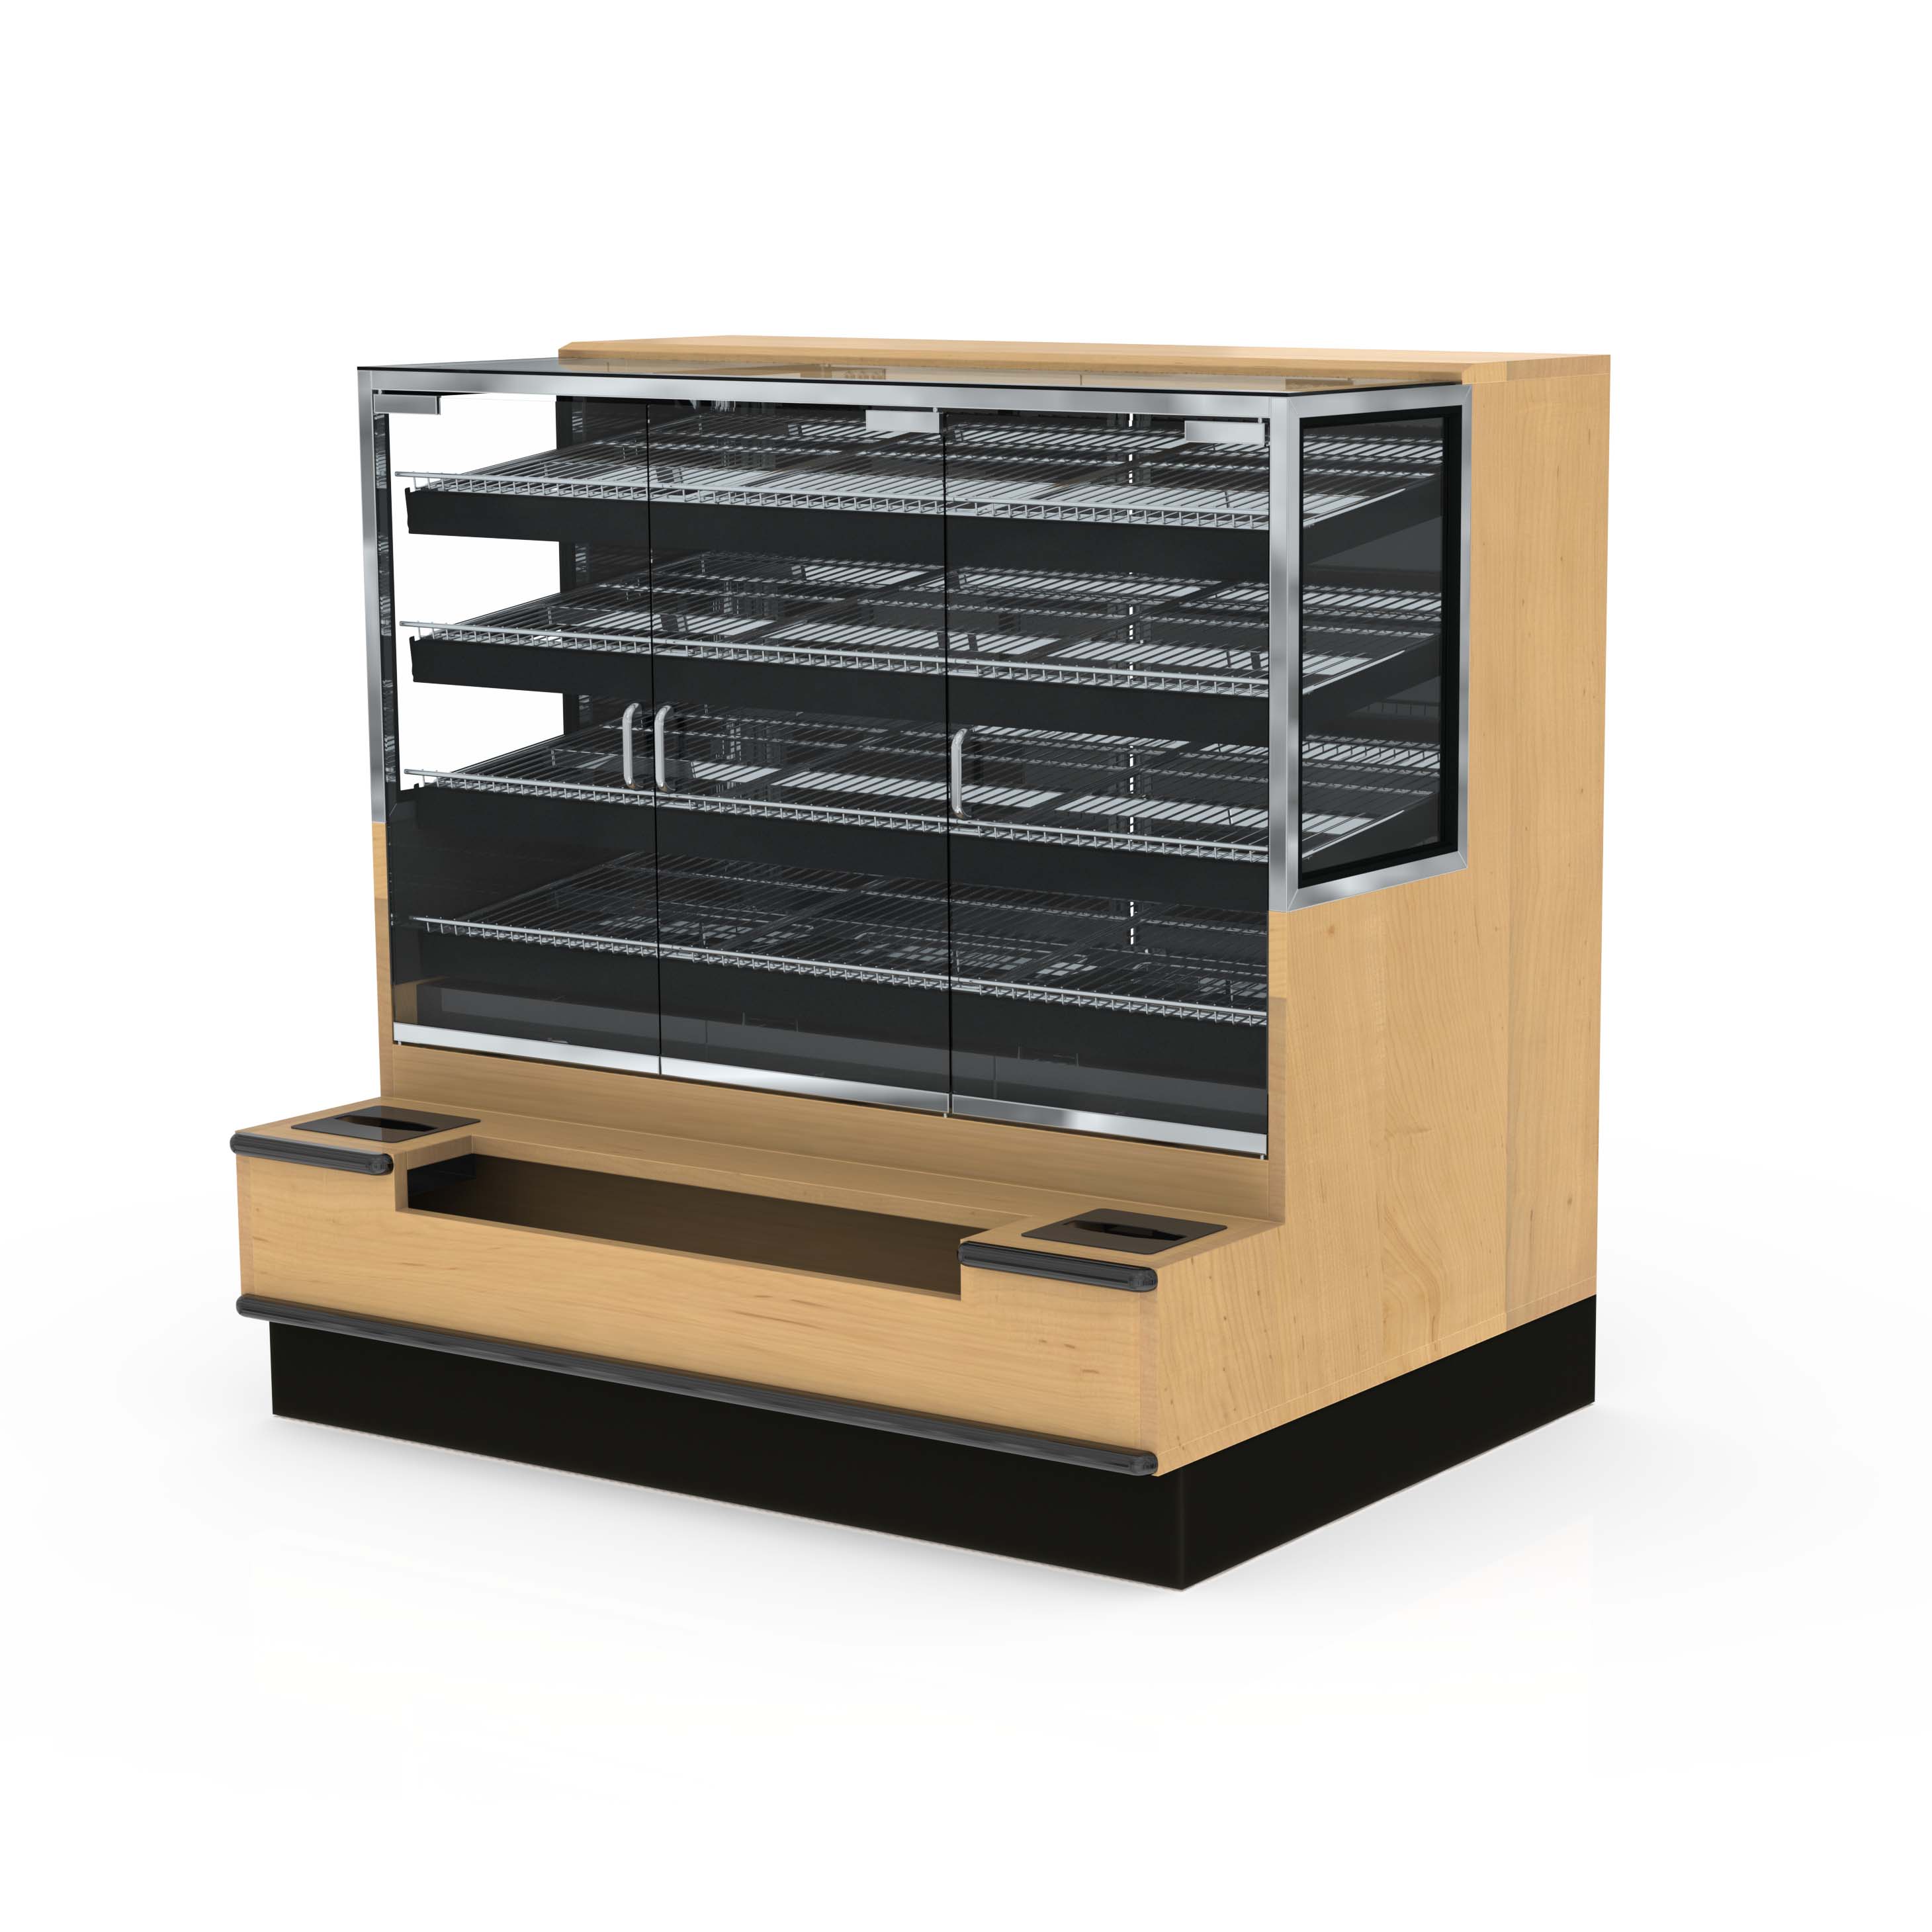 Low-Profile Bread Rack - JSI Store Fixtures, an LSI Company